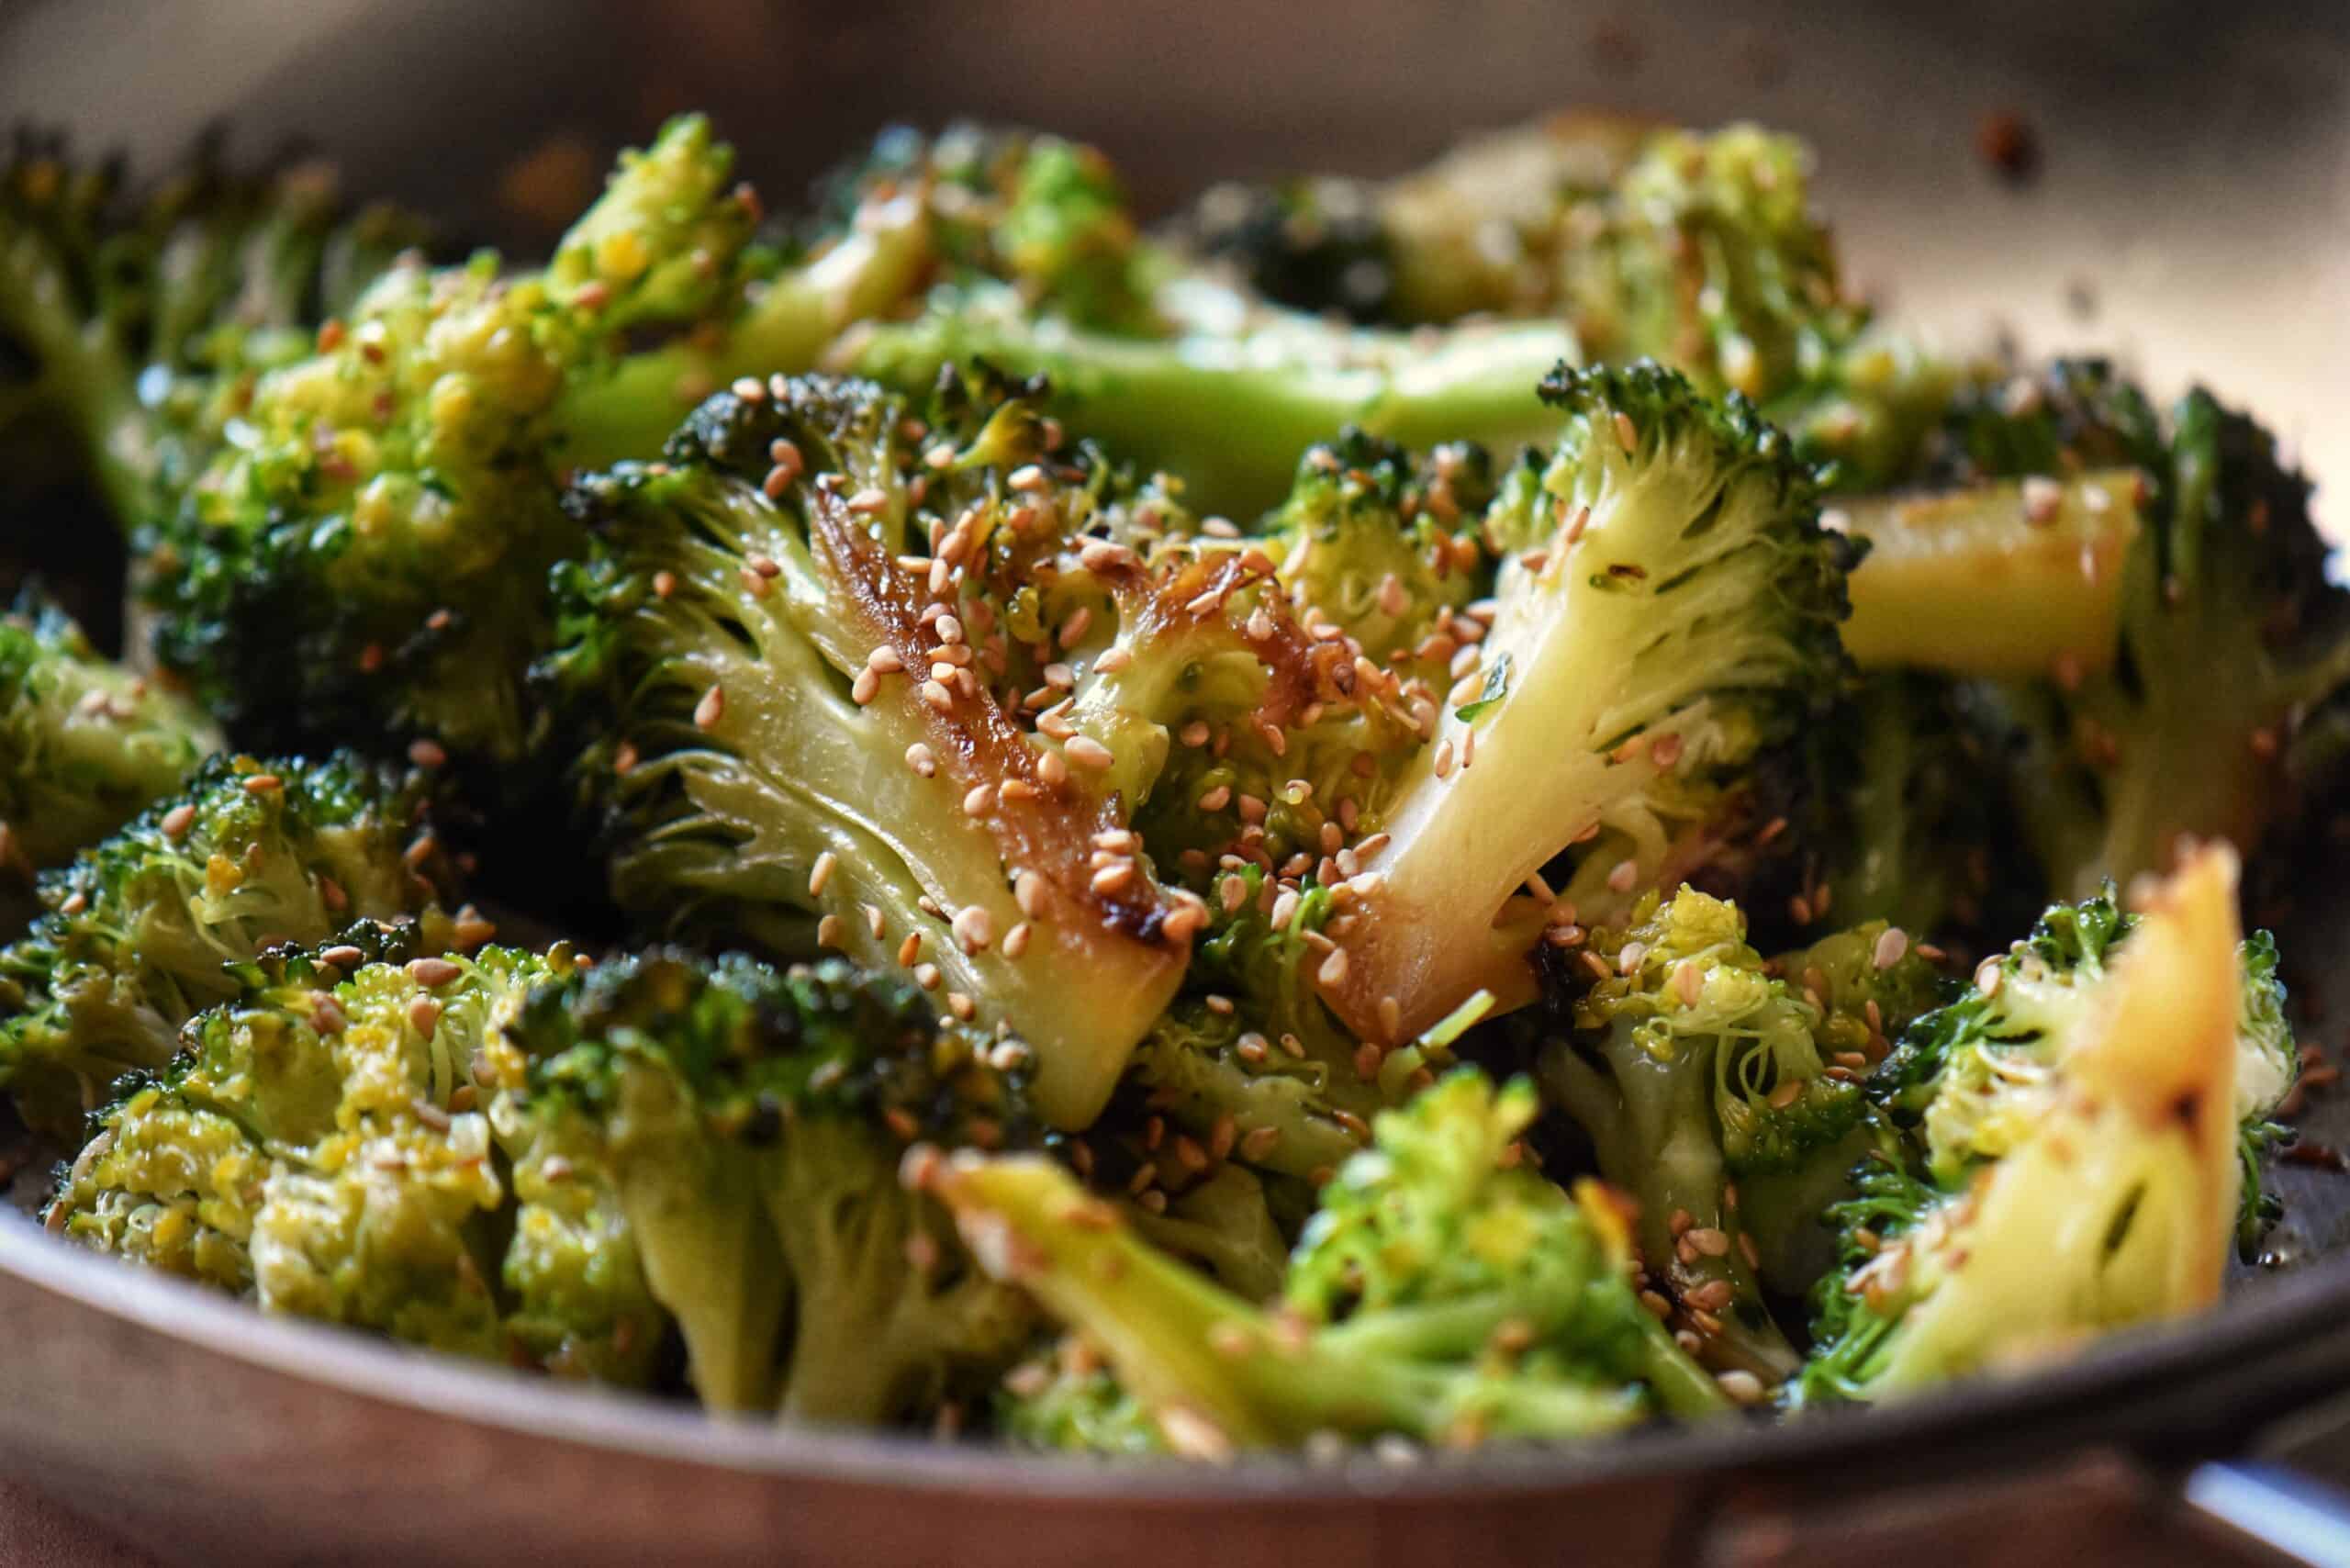 Pan fried broccoli garnished with toasted sesame seeds.